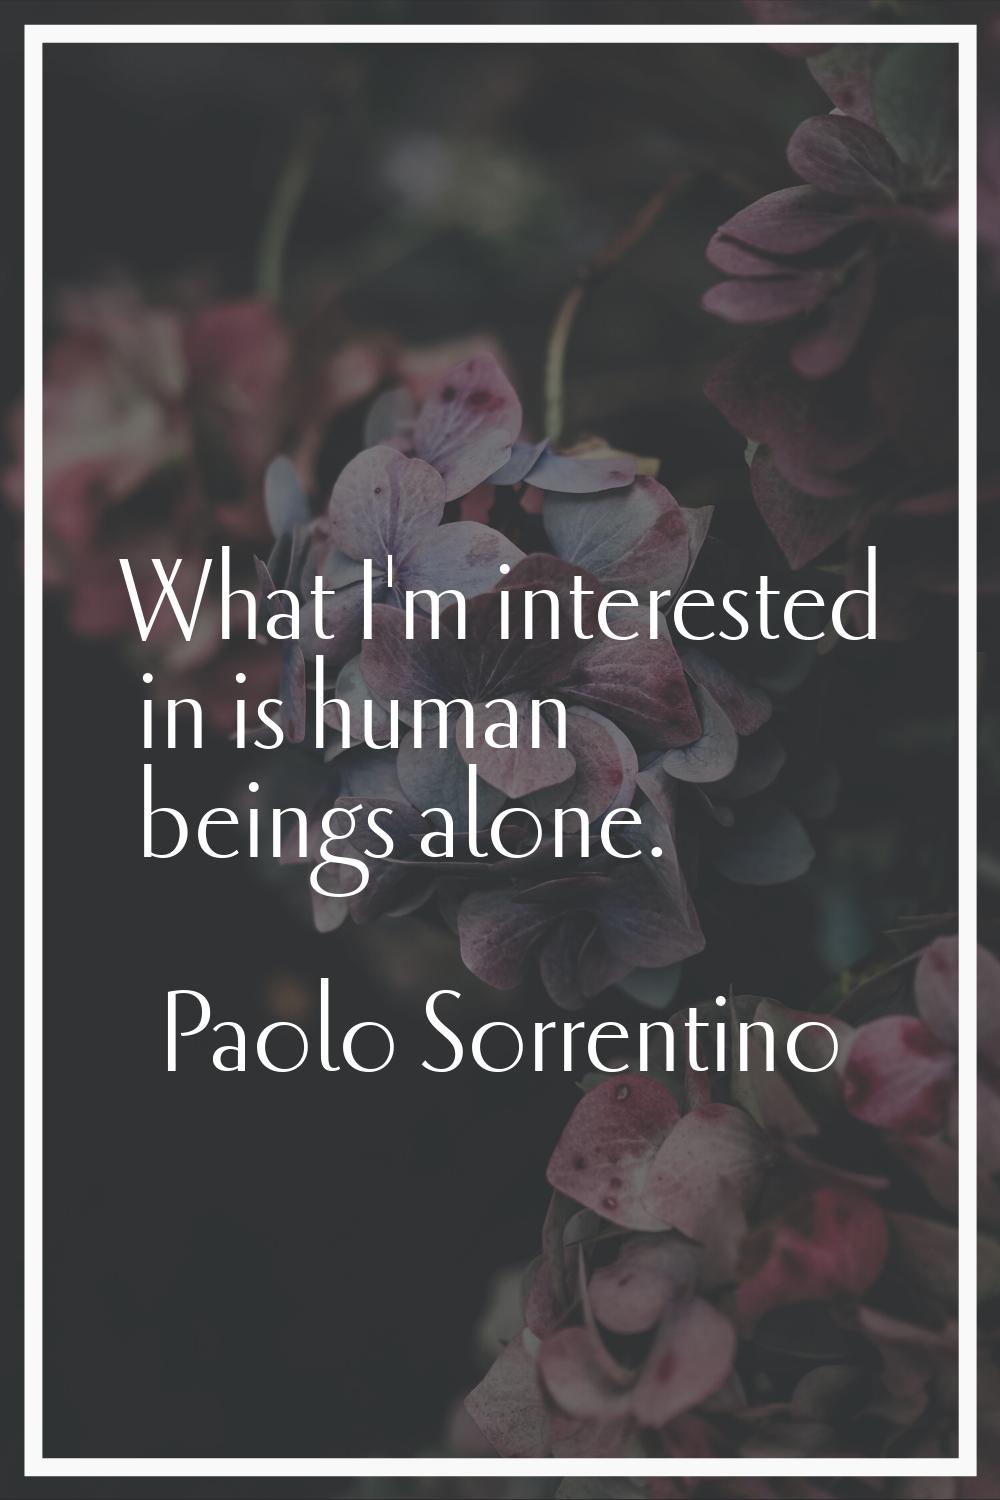 What I'm interested in is human beings alone.